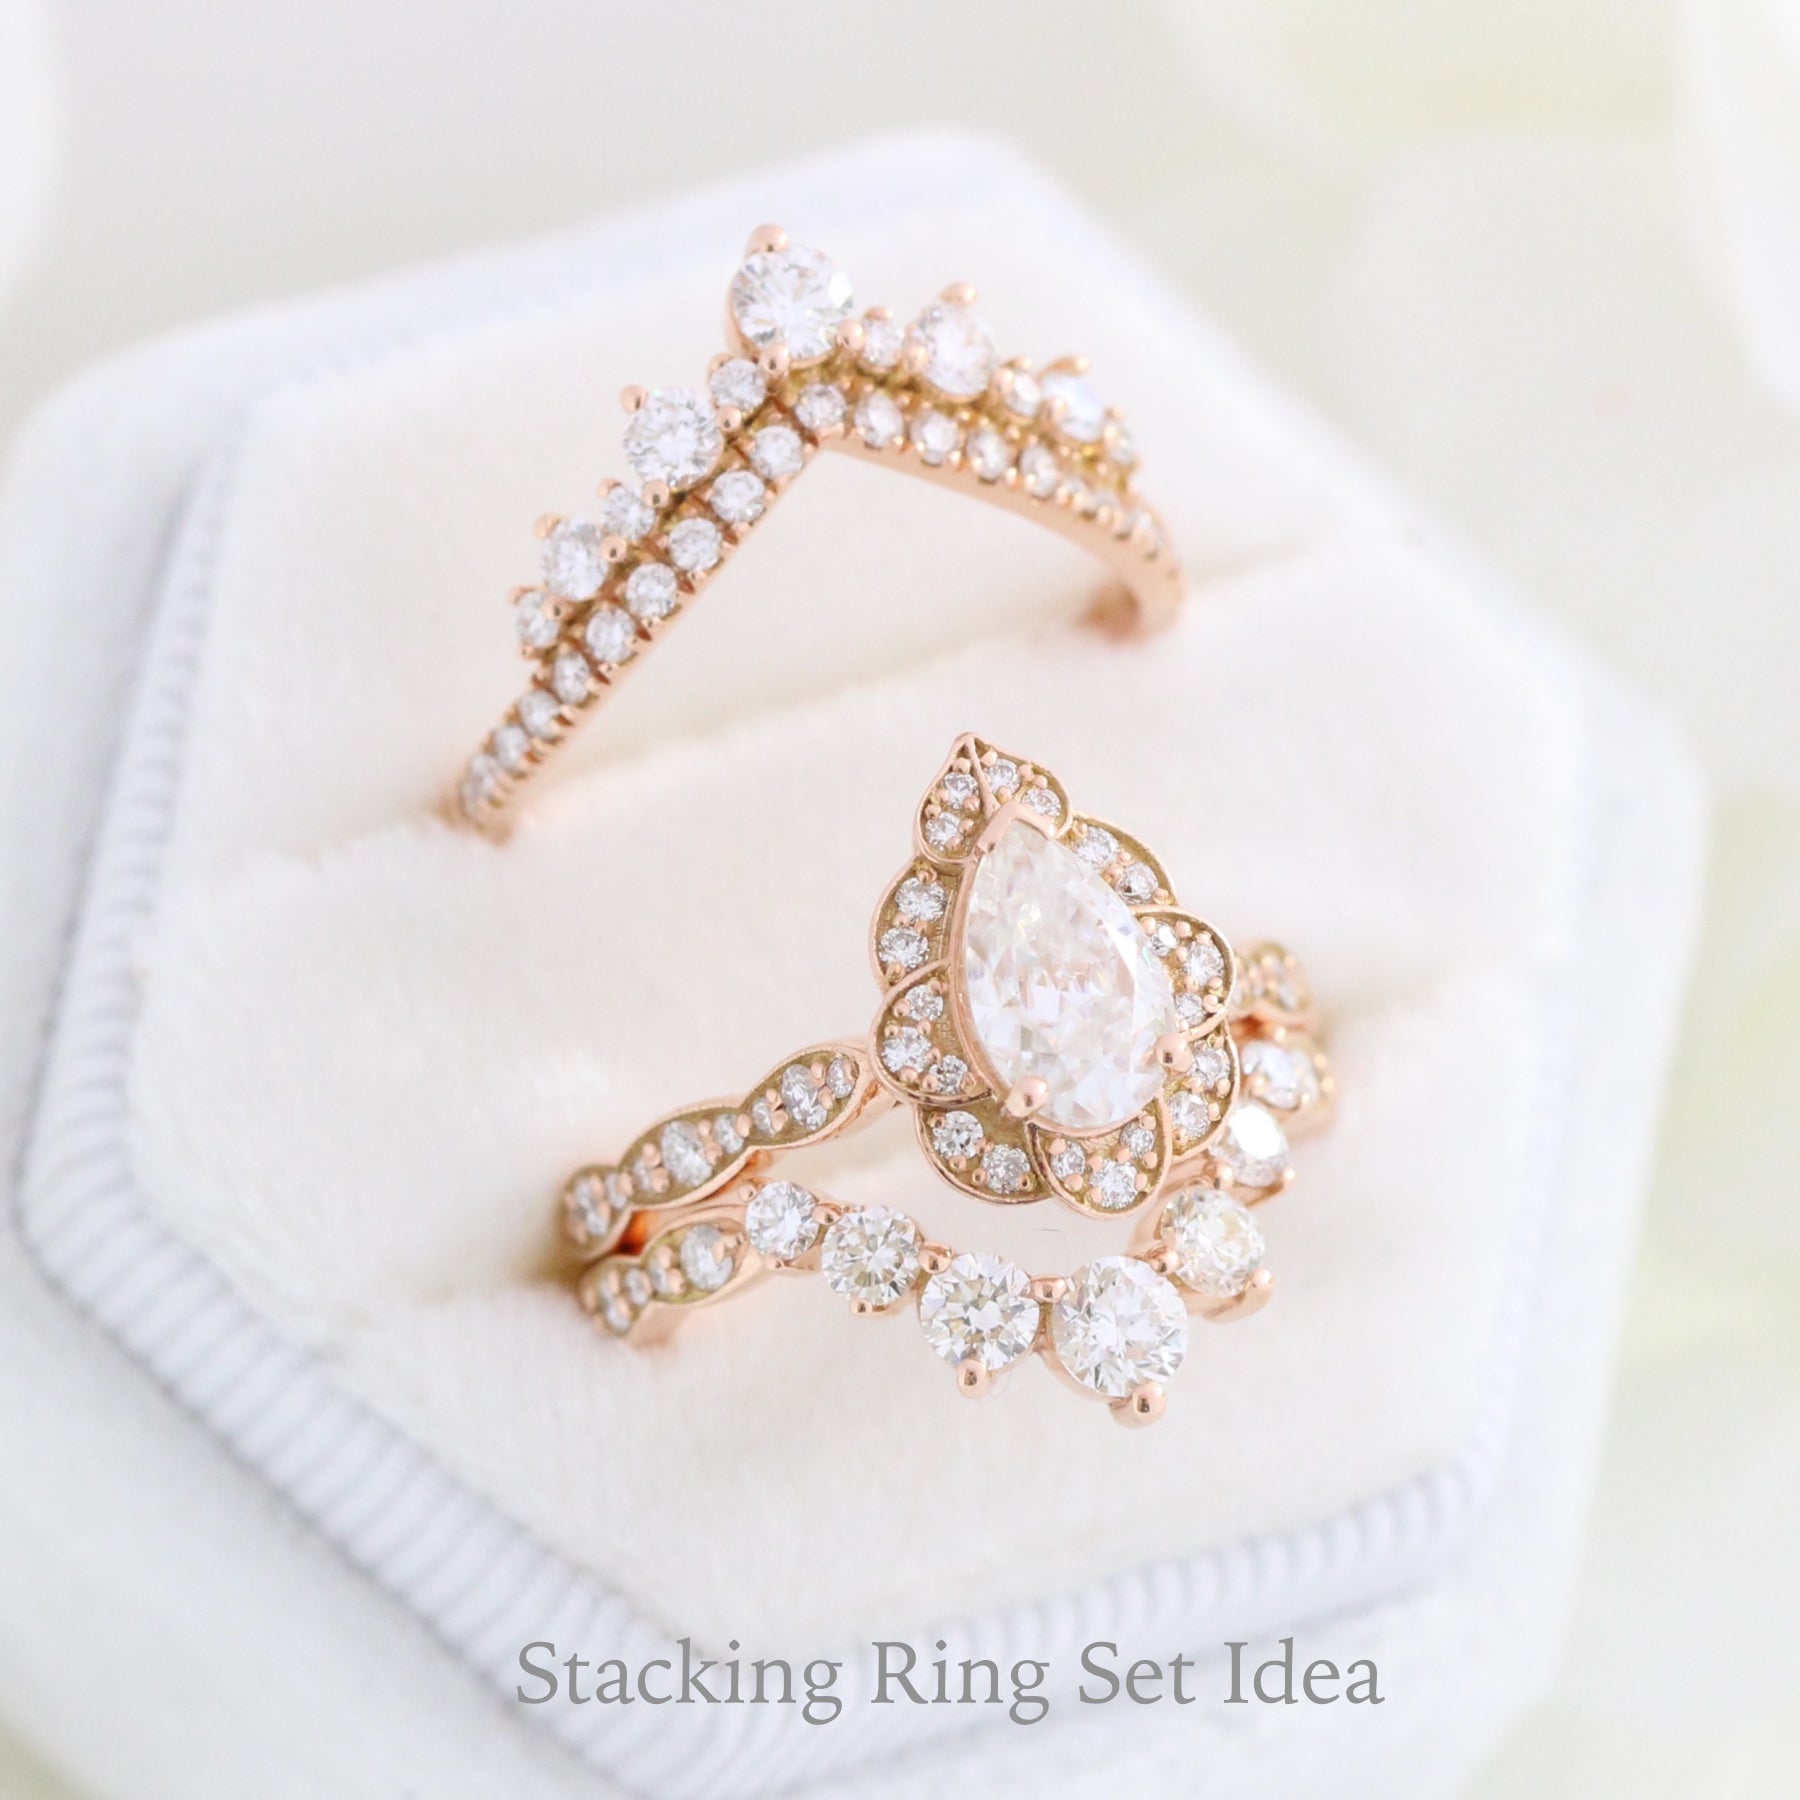 Rings of Love: Wedding Ring Sets to Symbolize Your Union